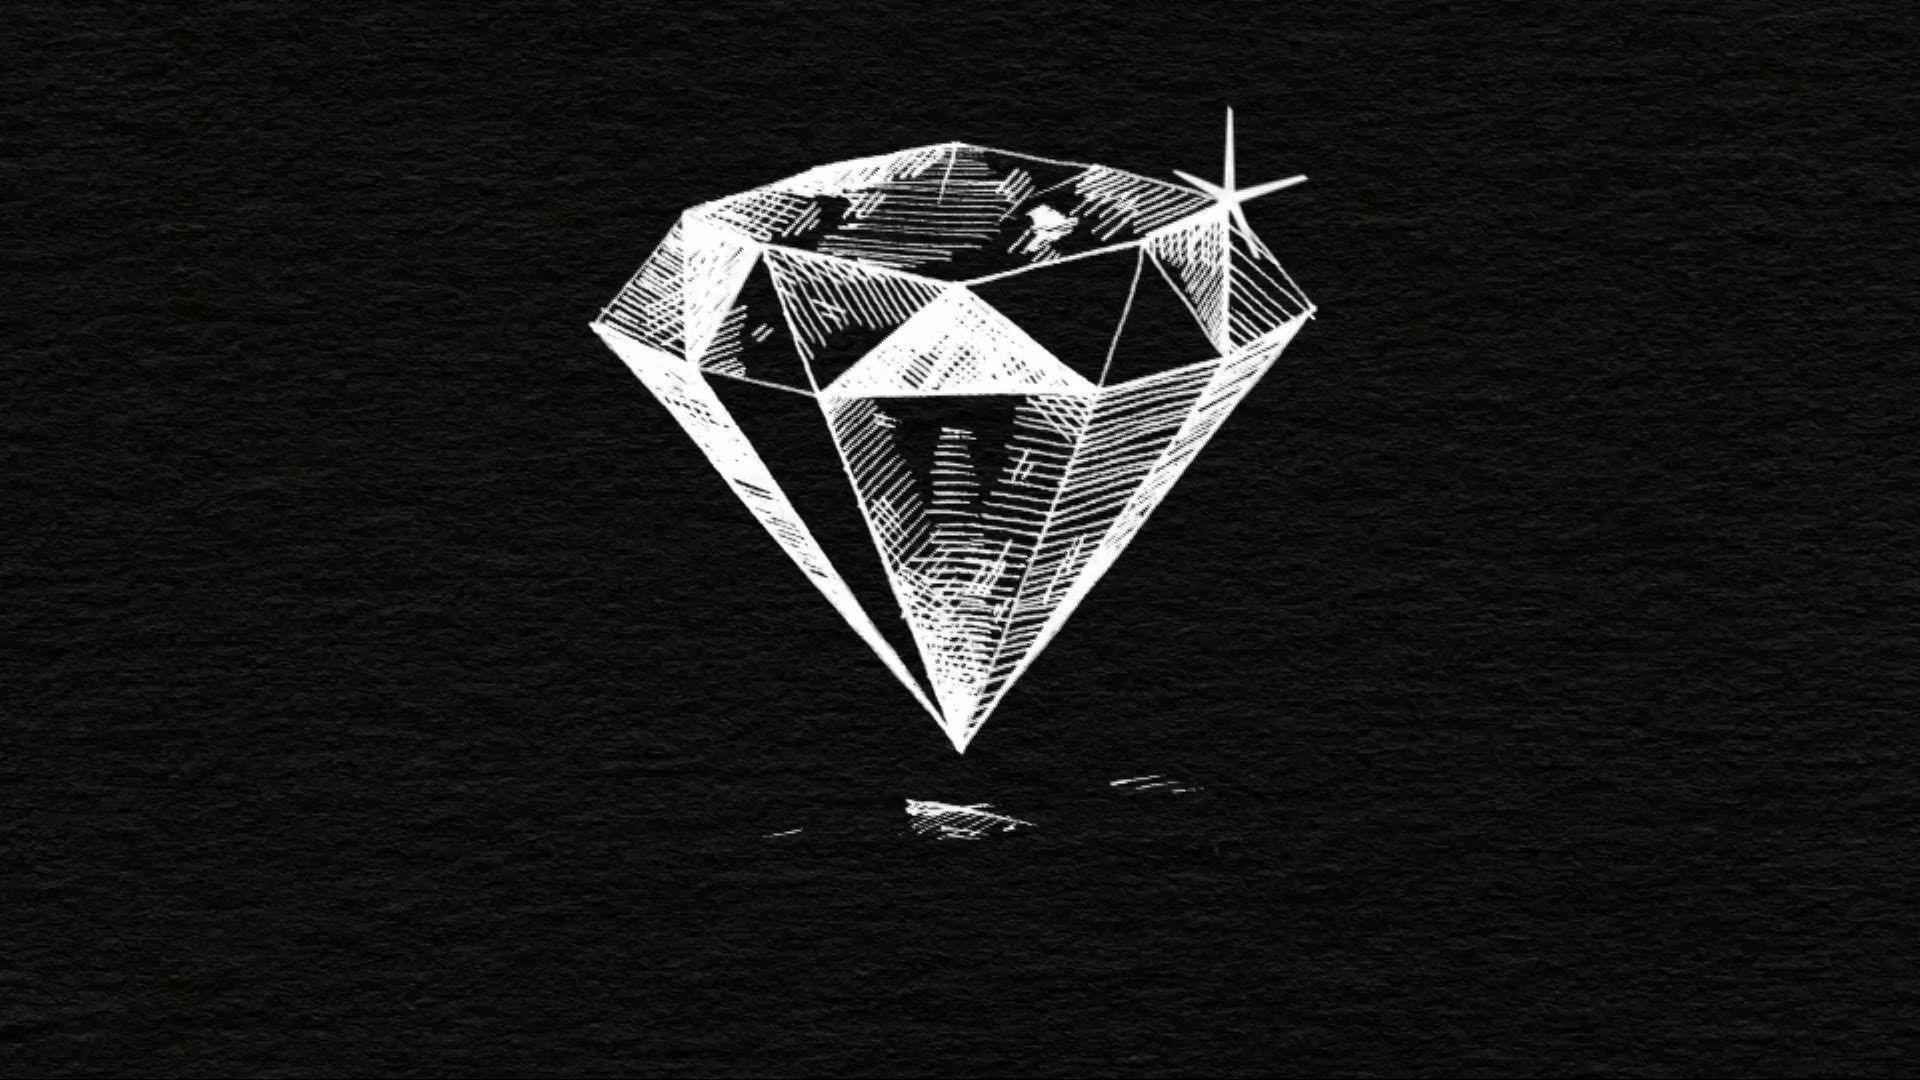 Cool Diamond Supply Co Wallpapers Top Free Cool Diamond Supply Co Backgrounds Wallpaperaccess 